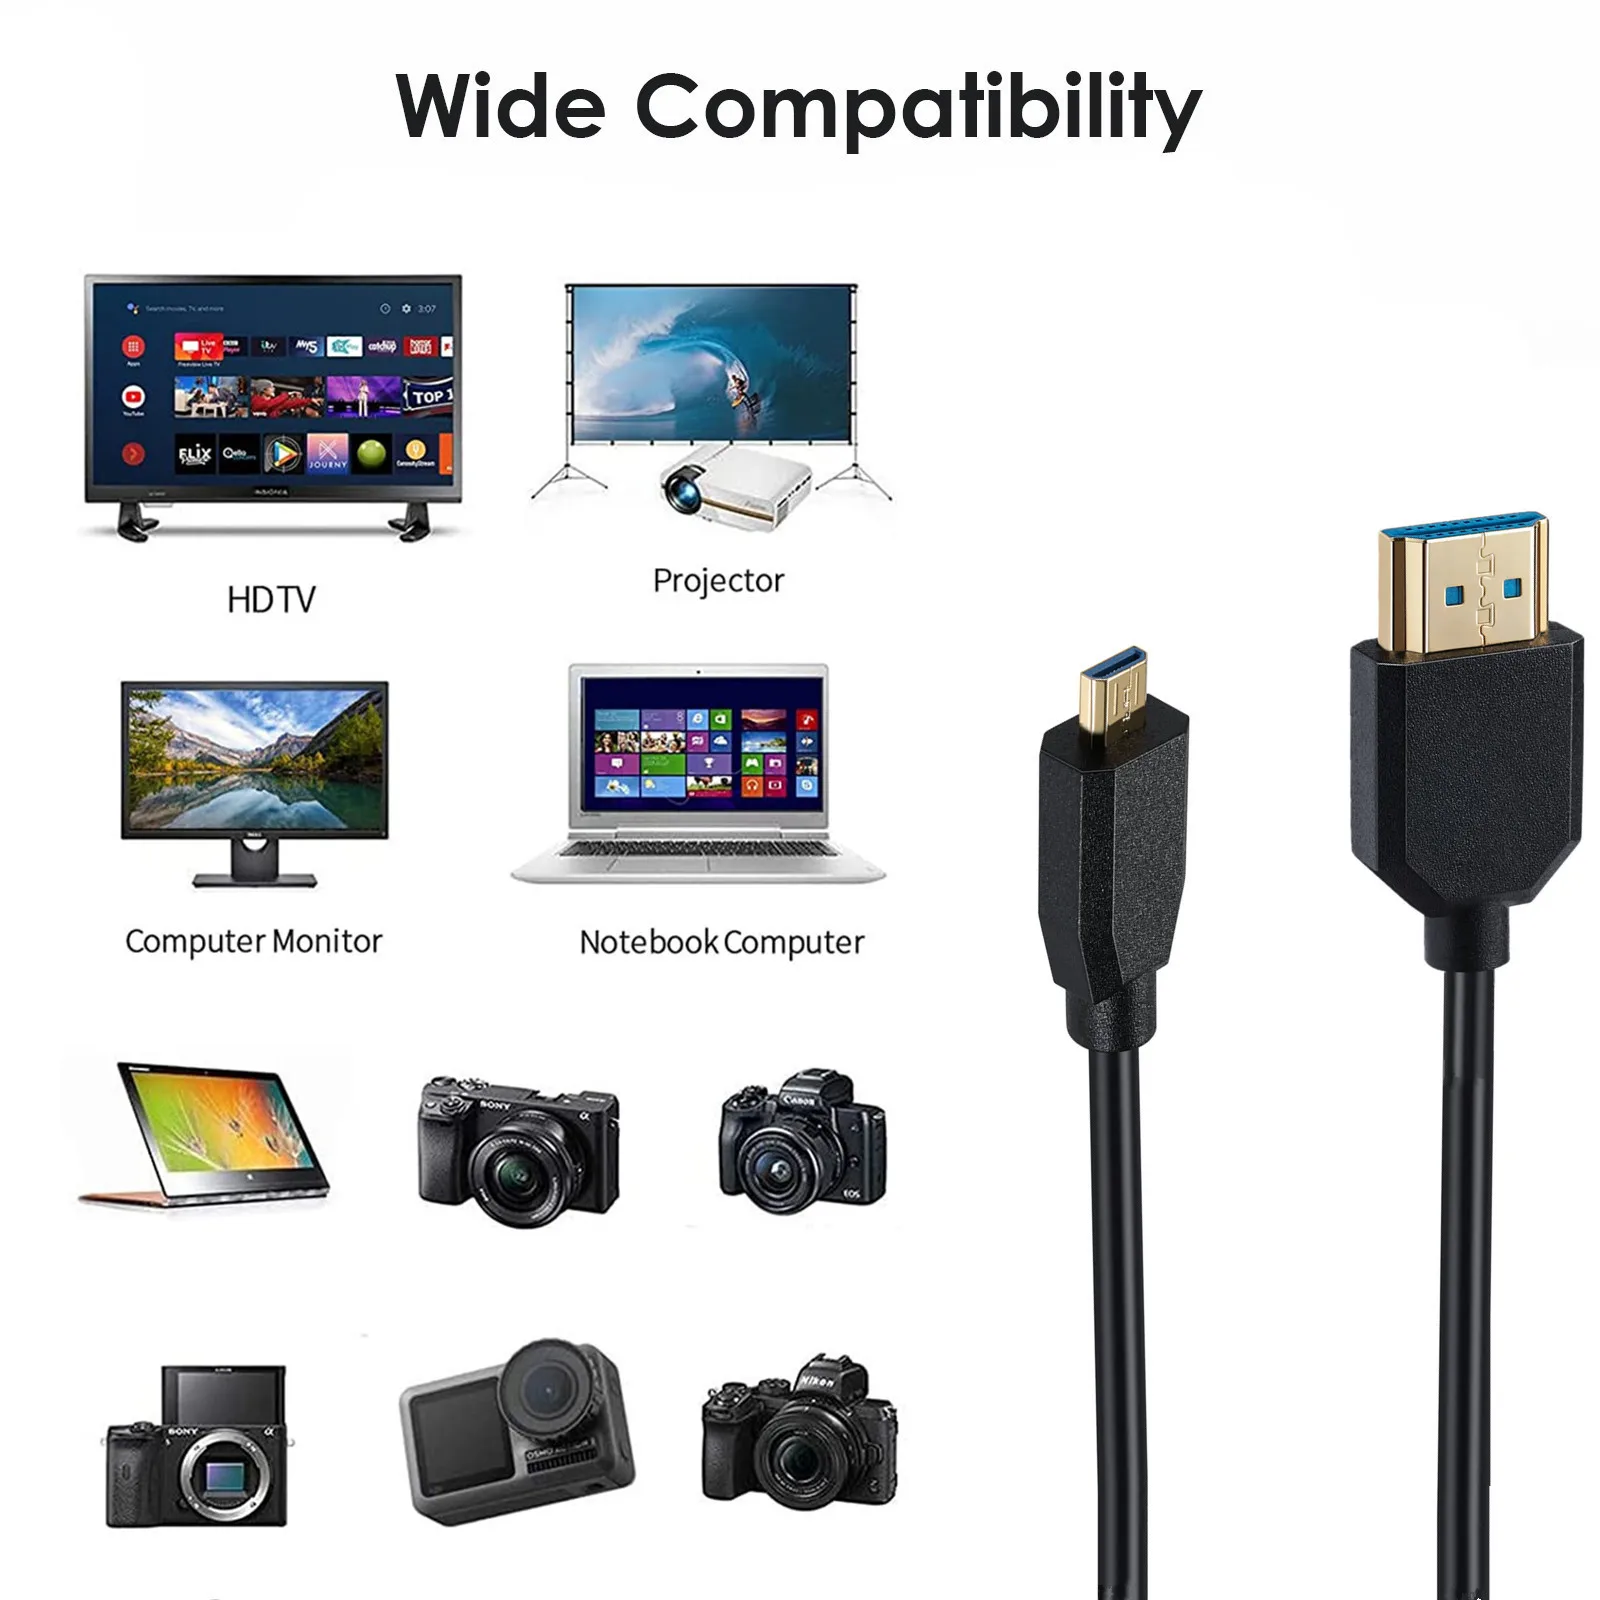 Mini HDMI Cable suitable for HDTVs, TVs, digital cameras, SLR cameras,  camcorders, graphics cards, tablets, monitors and other HDMI-enabled  devices.